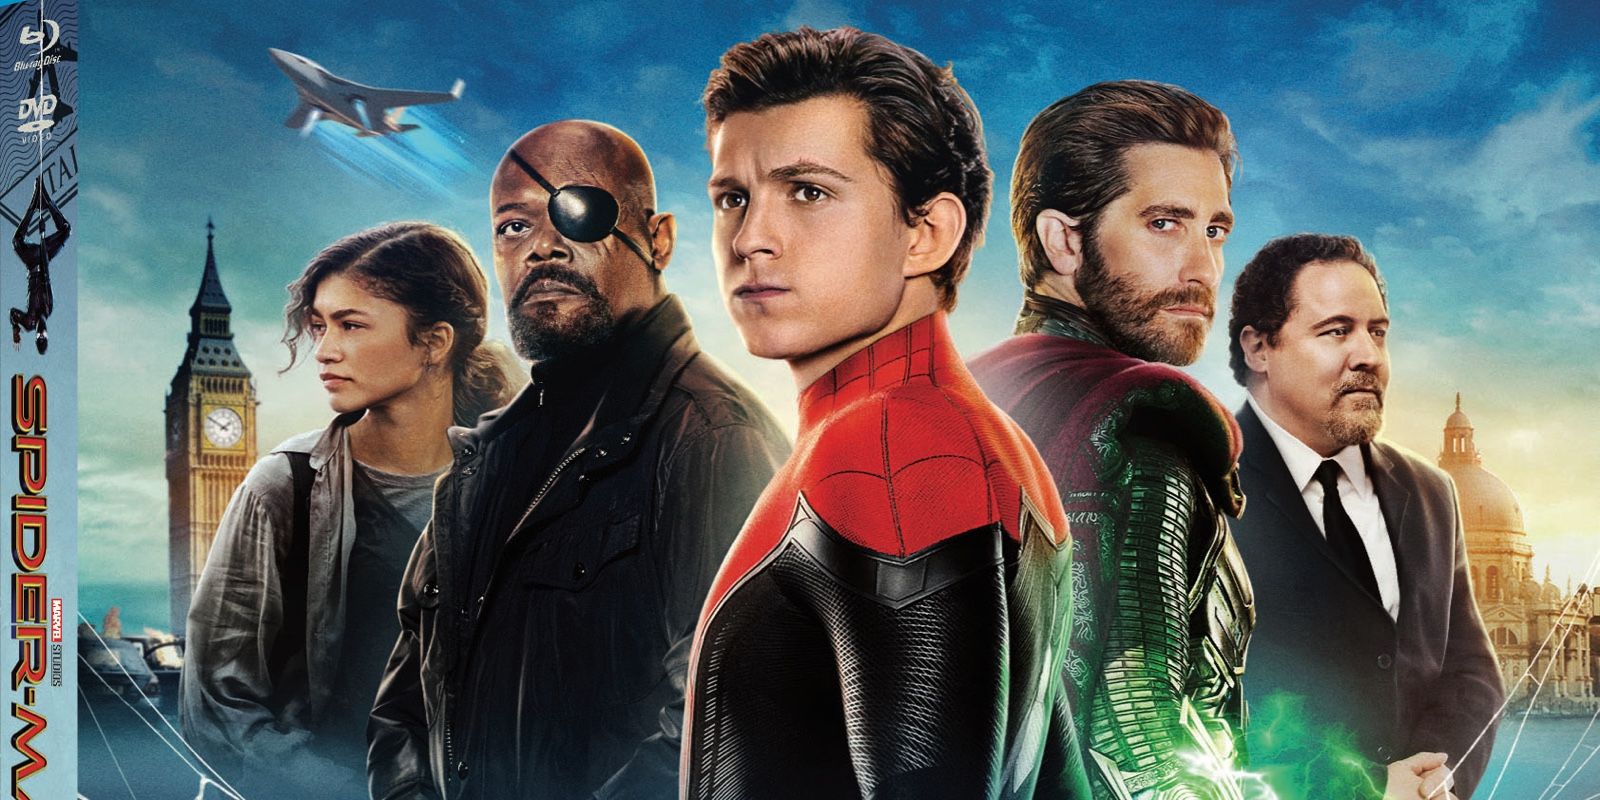 Spider-Man: Far From Home DVD Release Date October 1, 2019